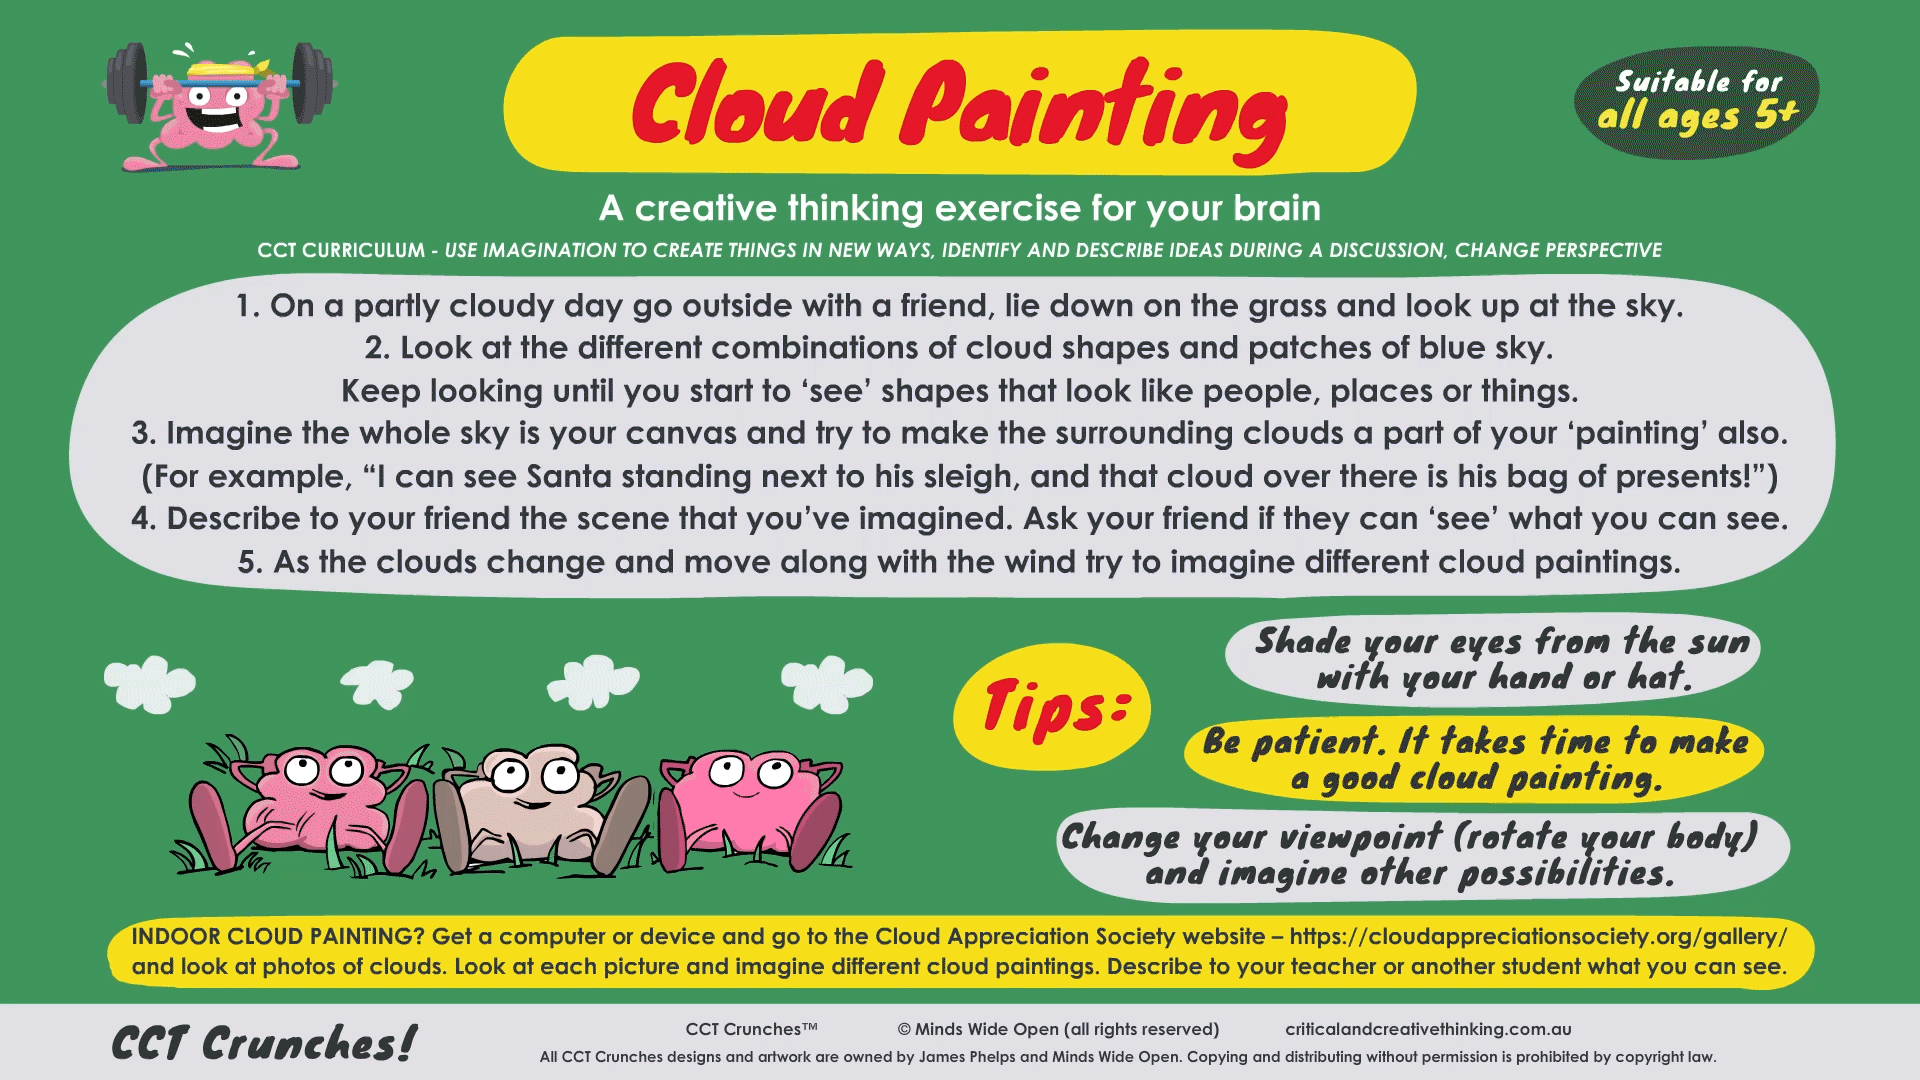 CCT_Crunches_5-Cloud Painting.gif